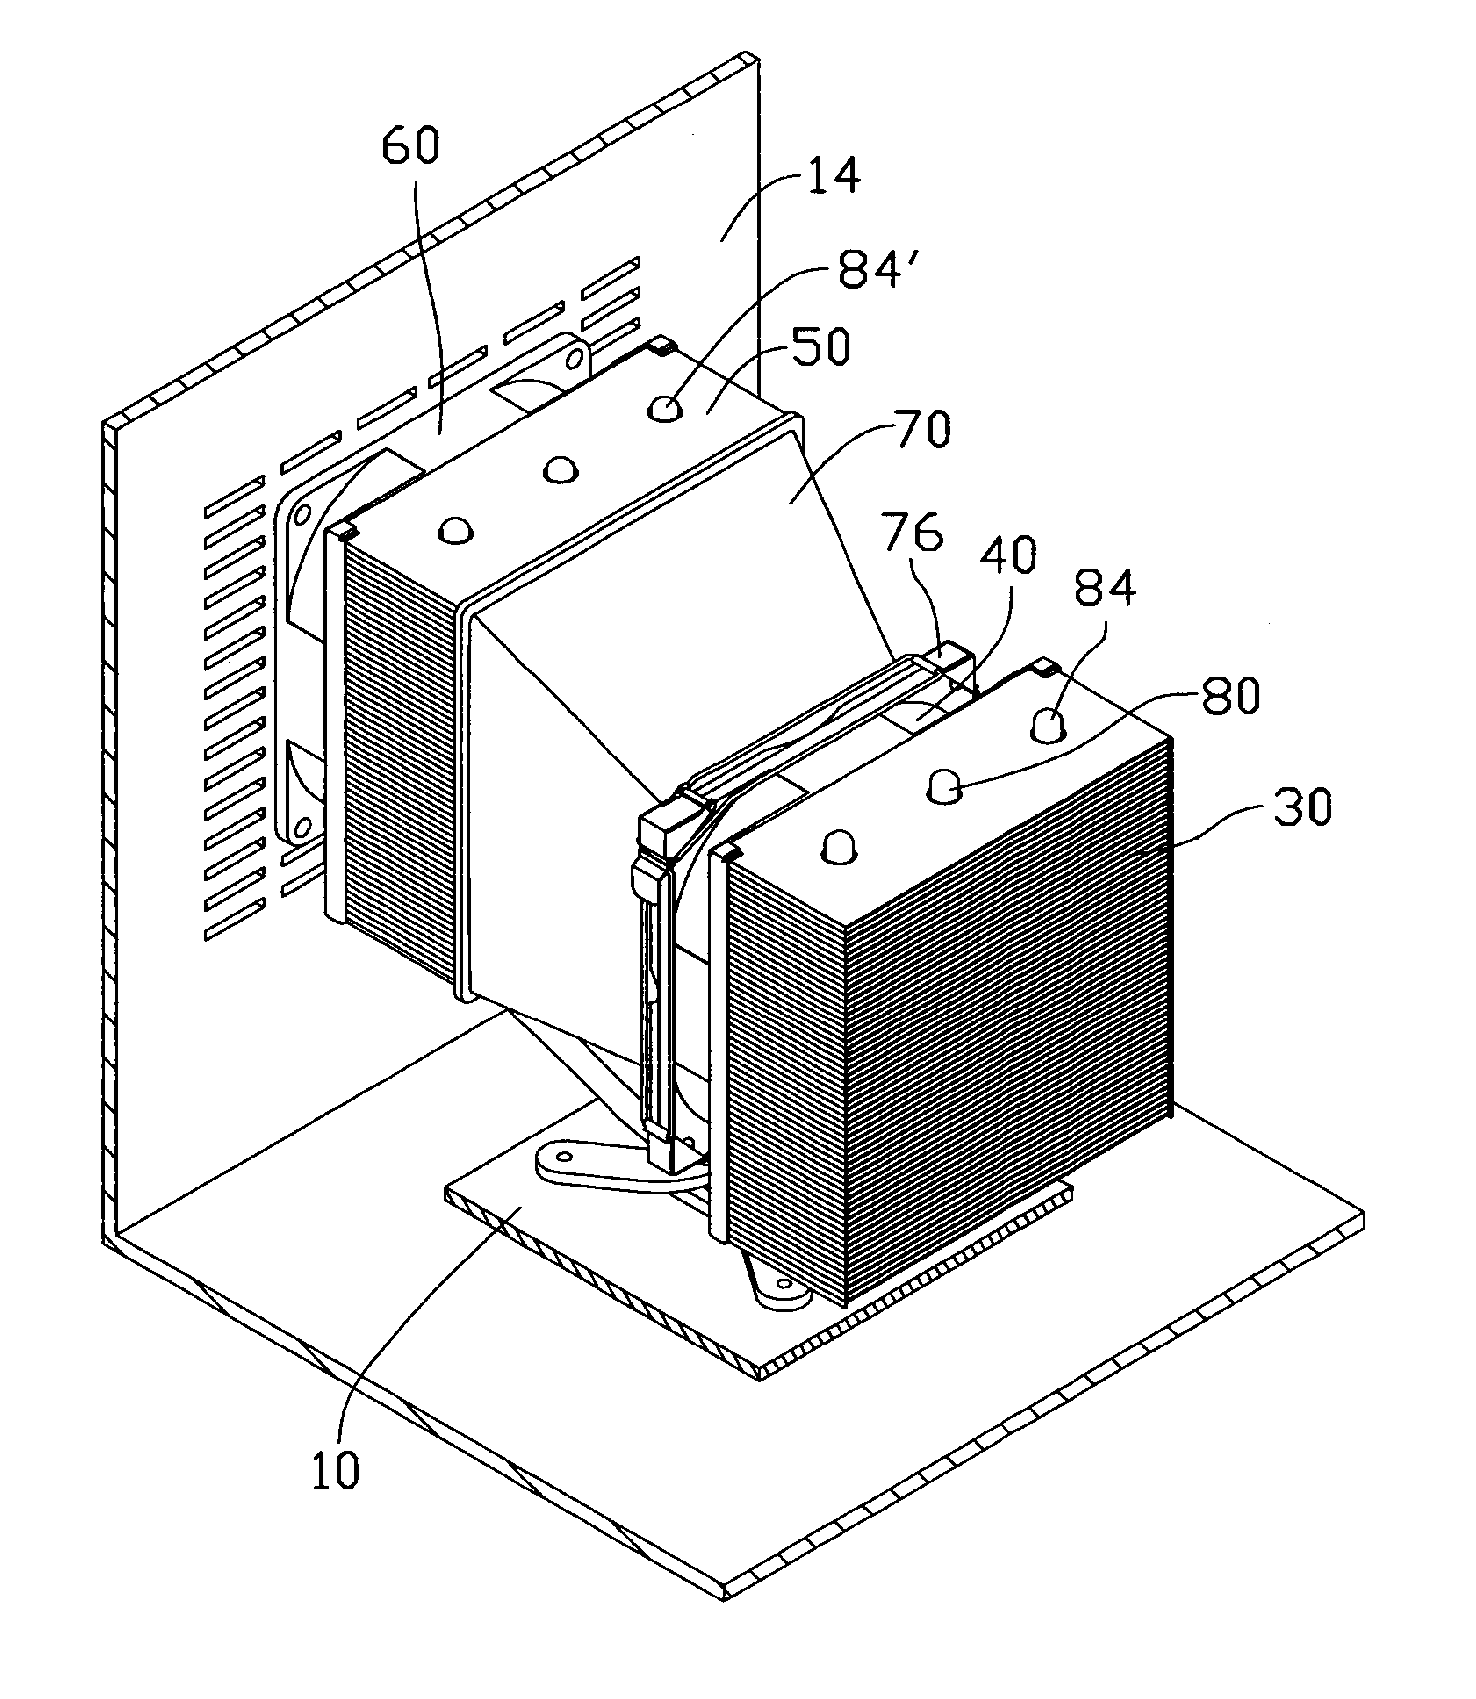 Electronic cooling system having a ventilating duct